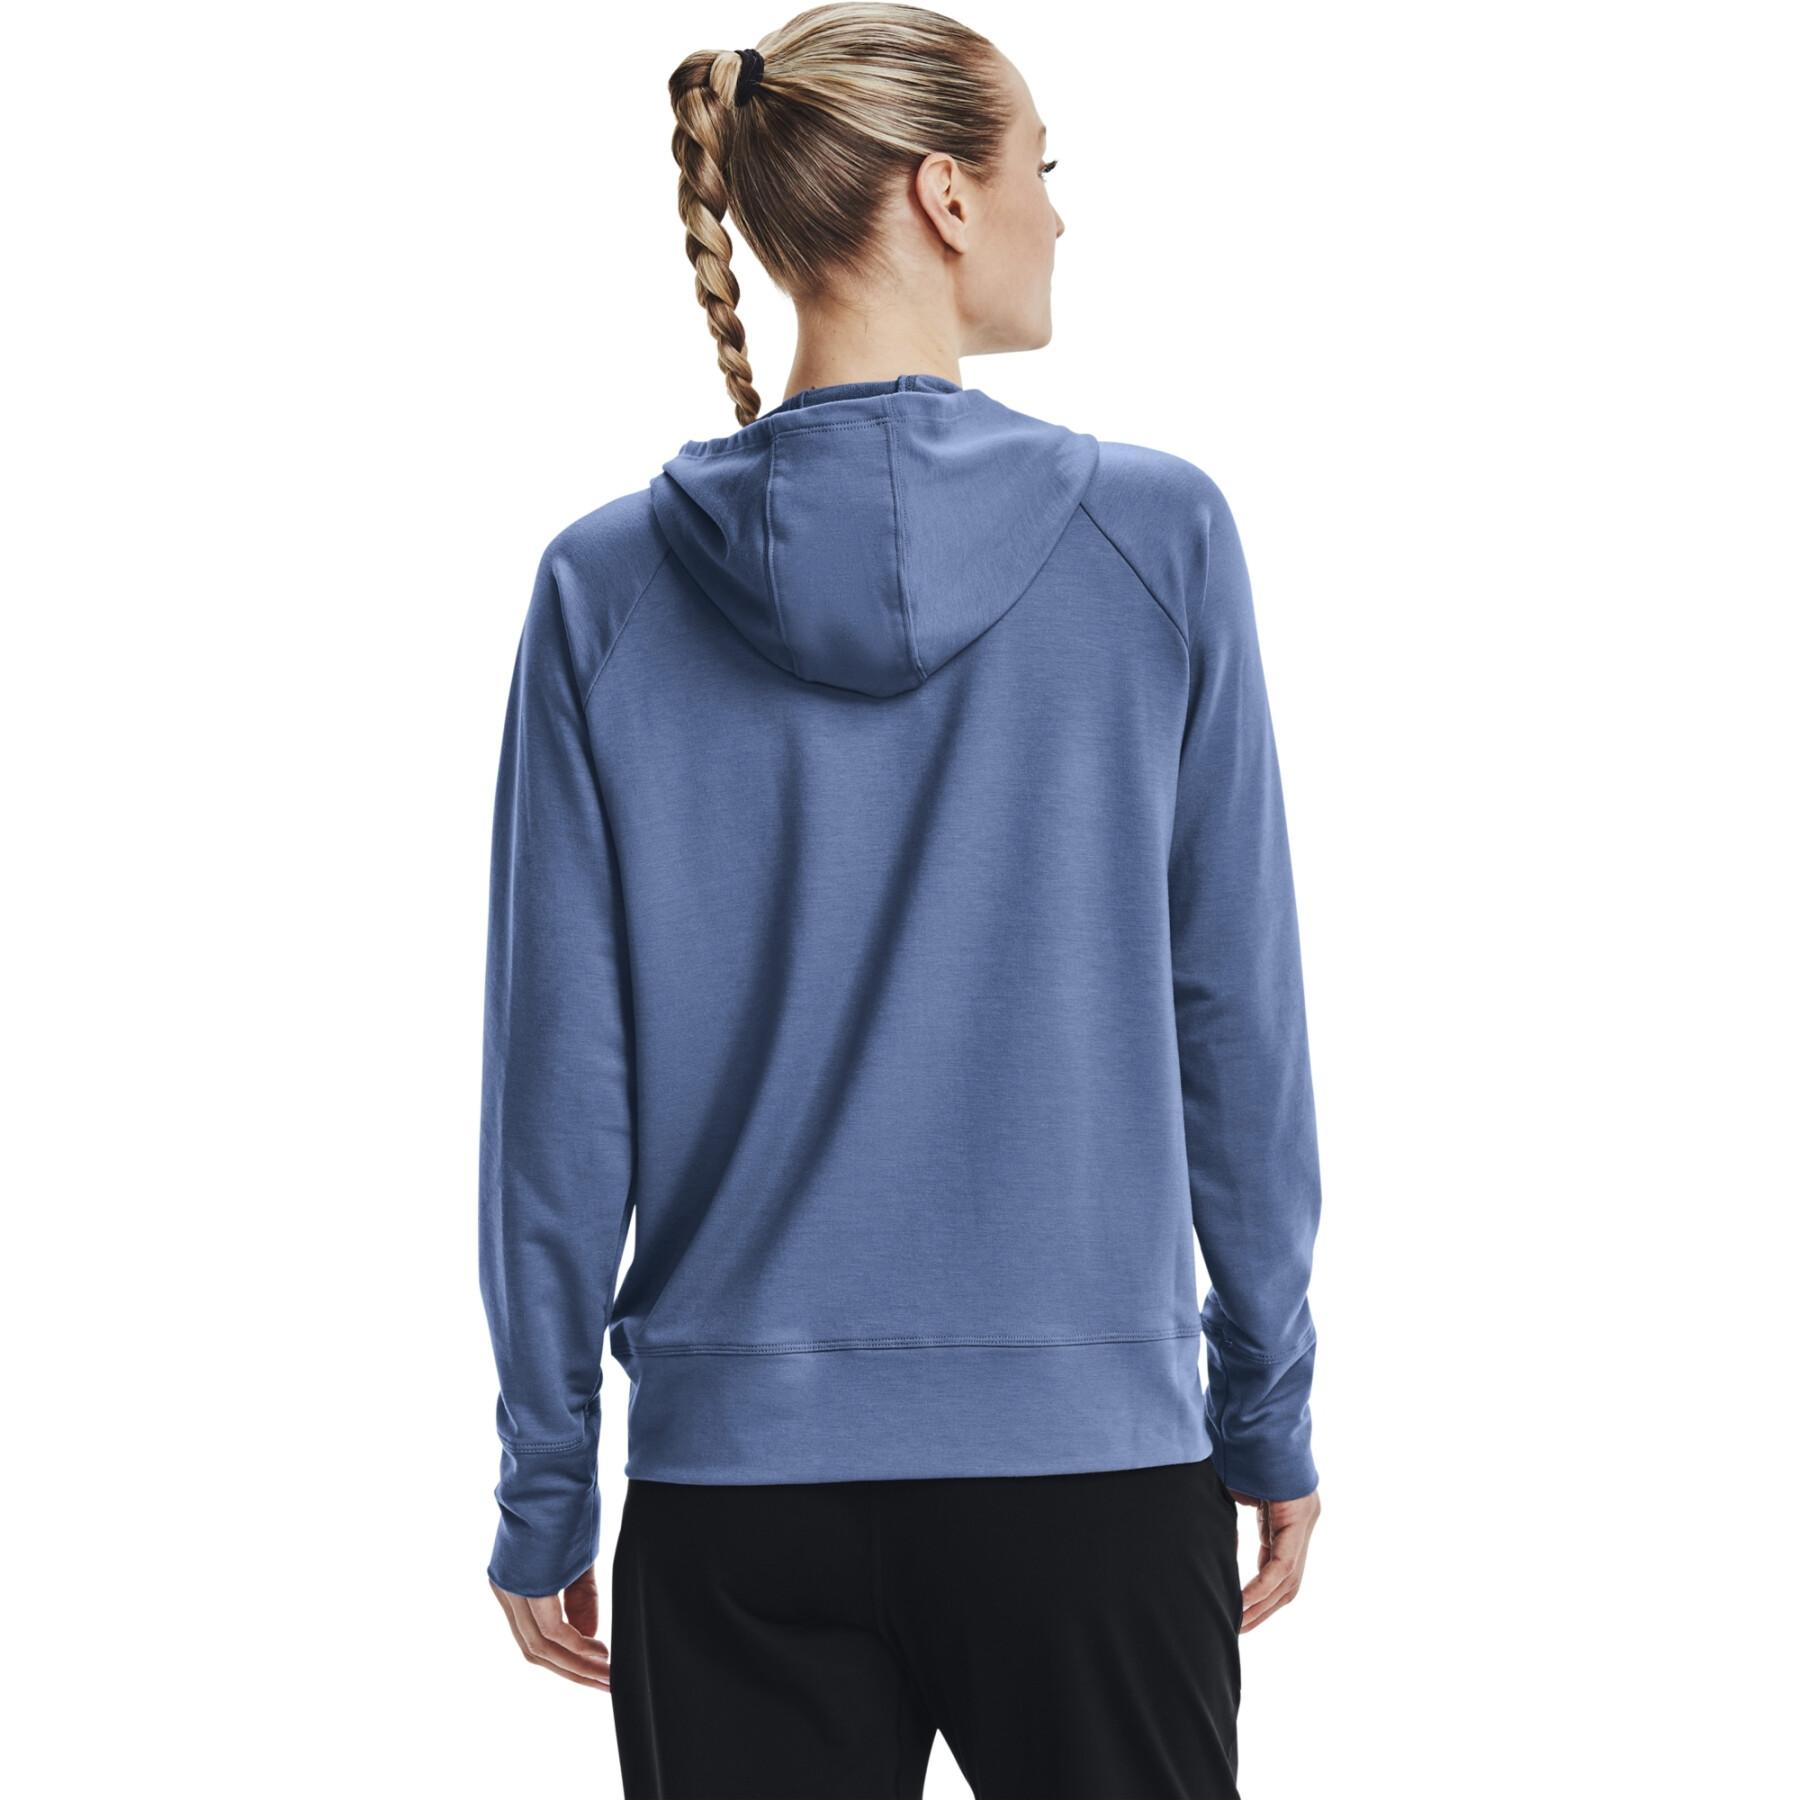 Women's hooded jacket Under Armour Rival Terry Taped